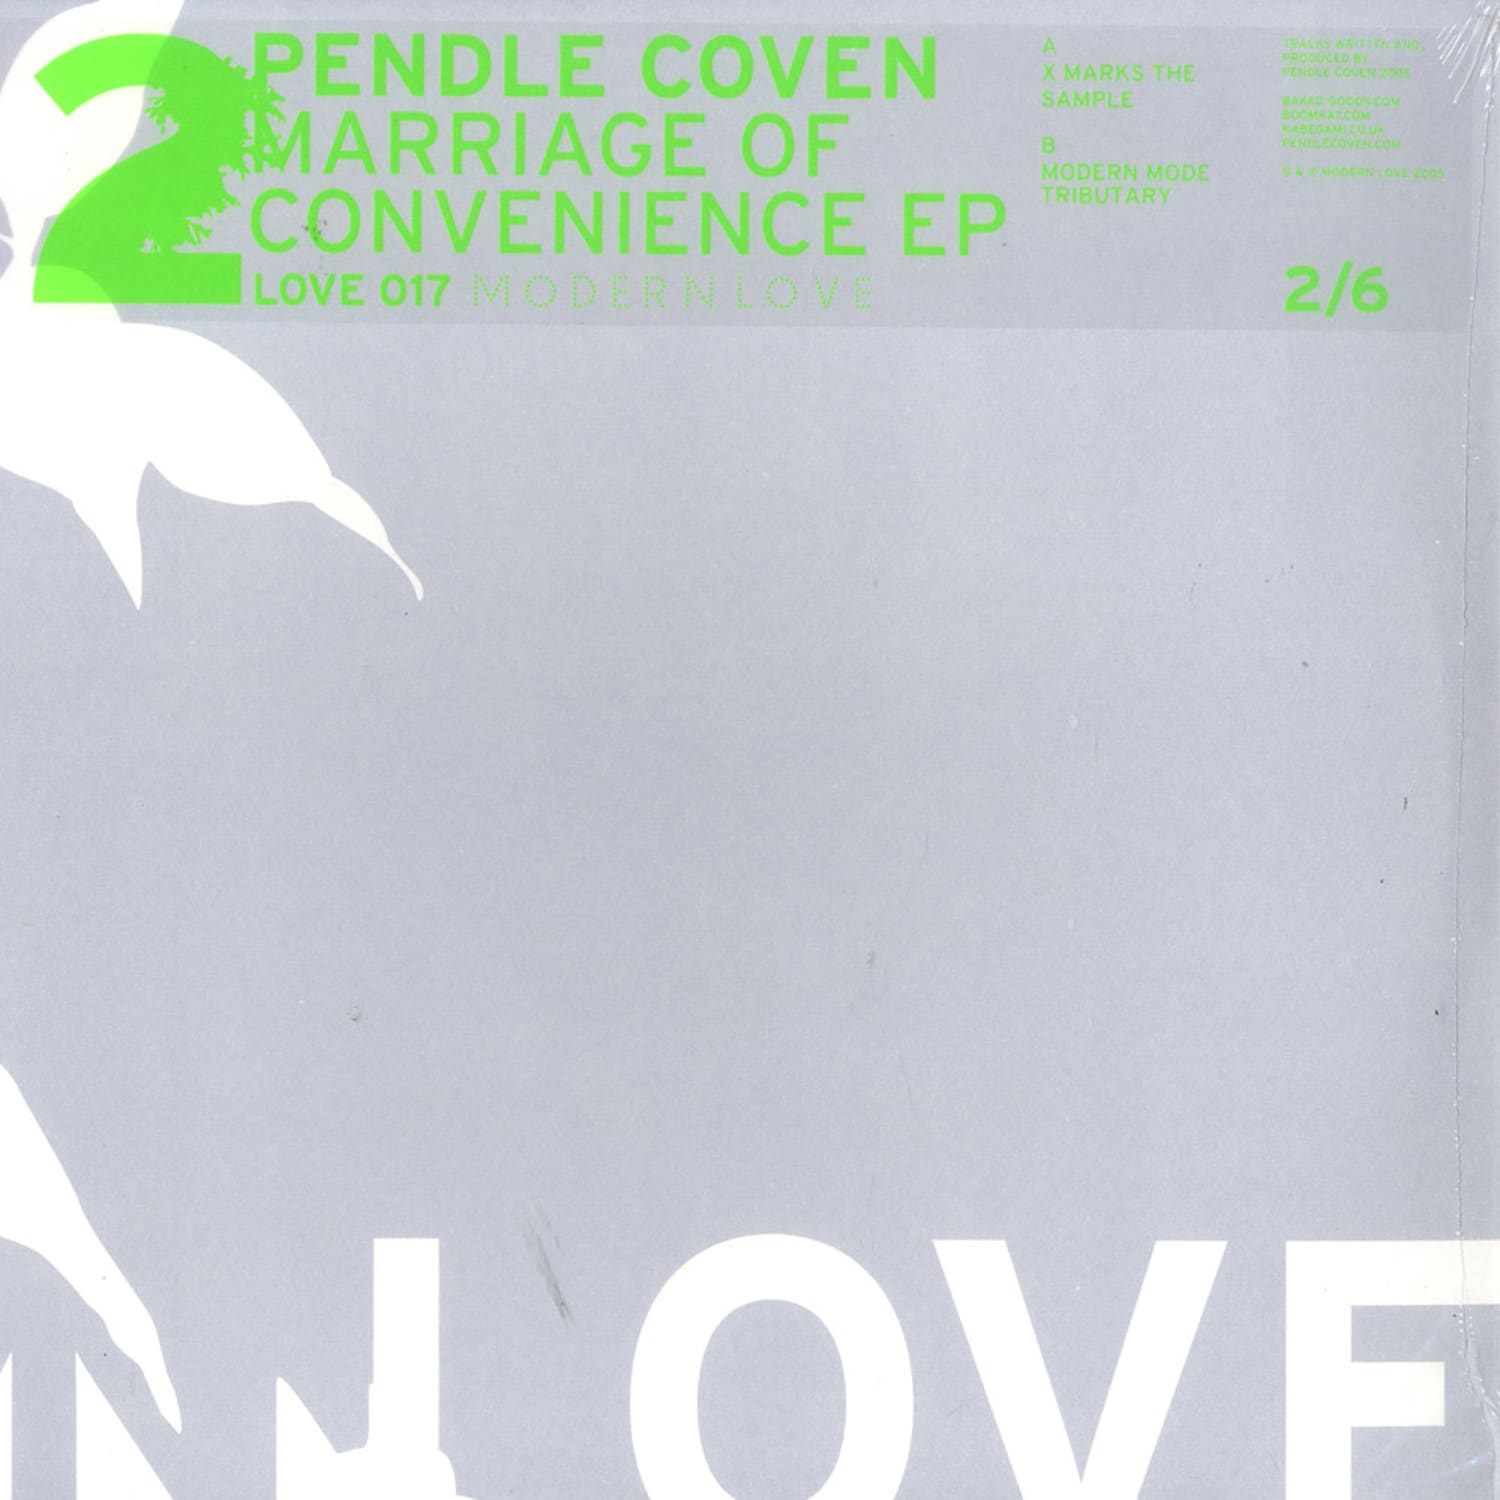 Pendle Coven - MARRIAGE OF CONVENIENCE EP